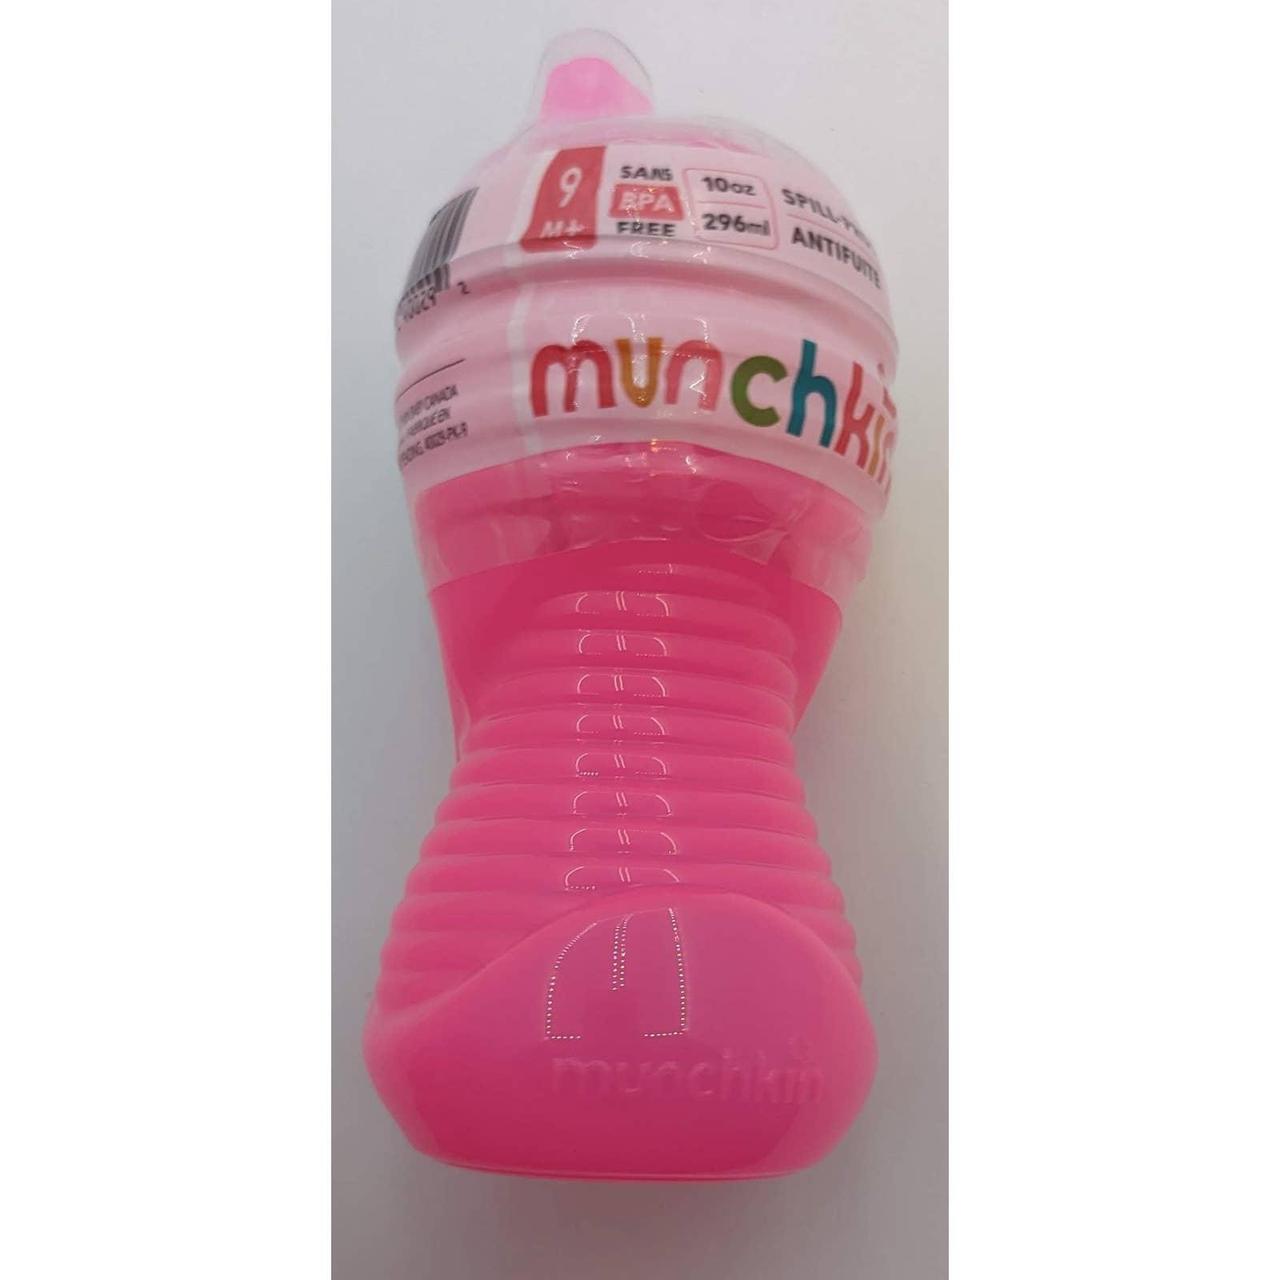 Mighty Grip Sippy Cup, 10oz